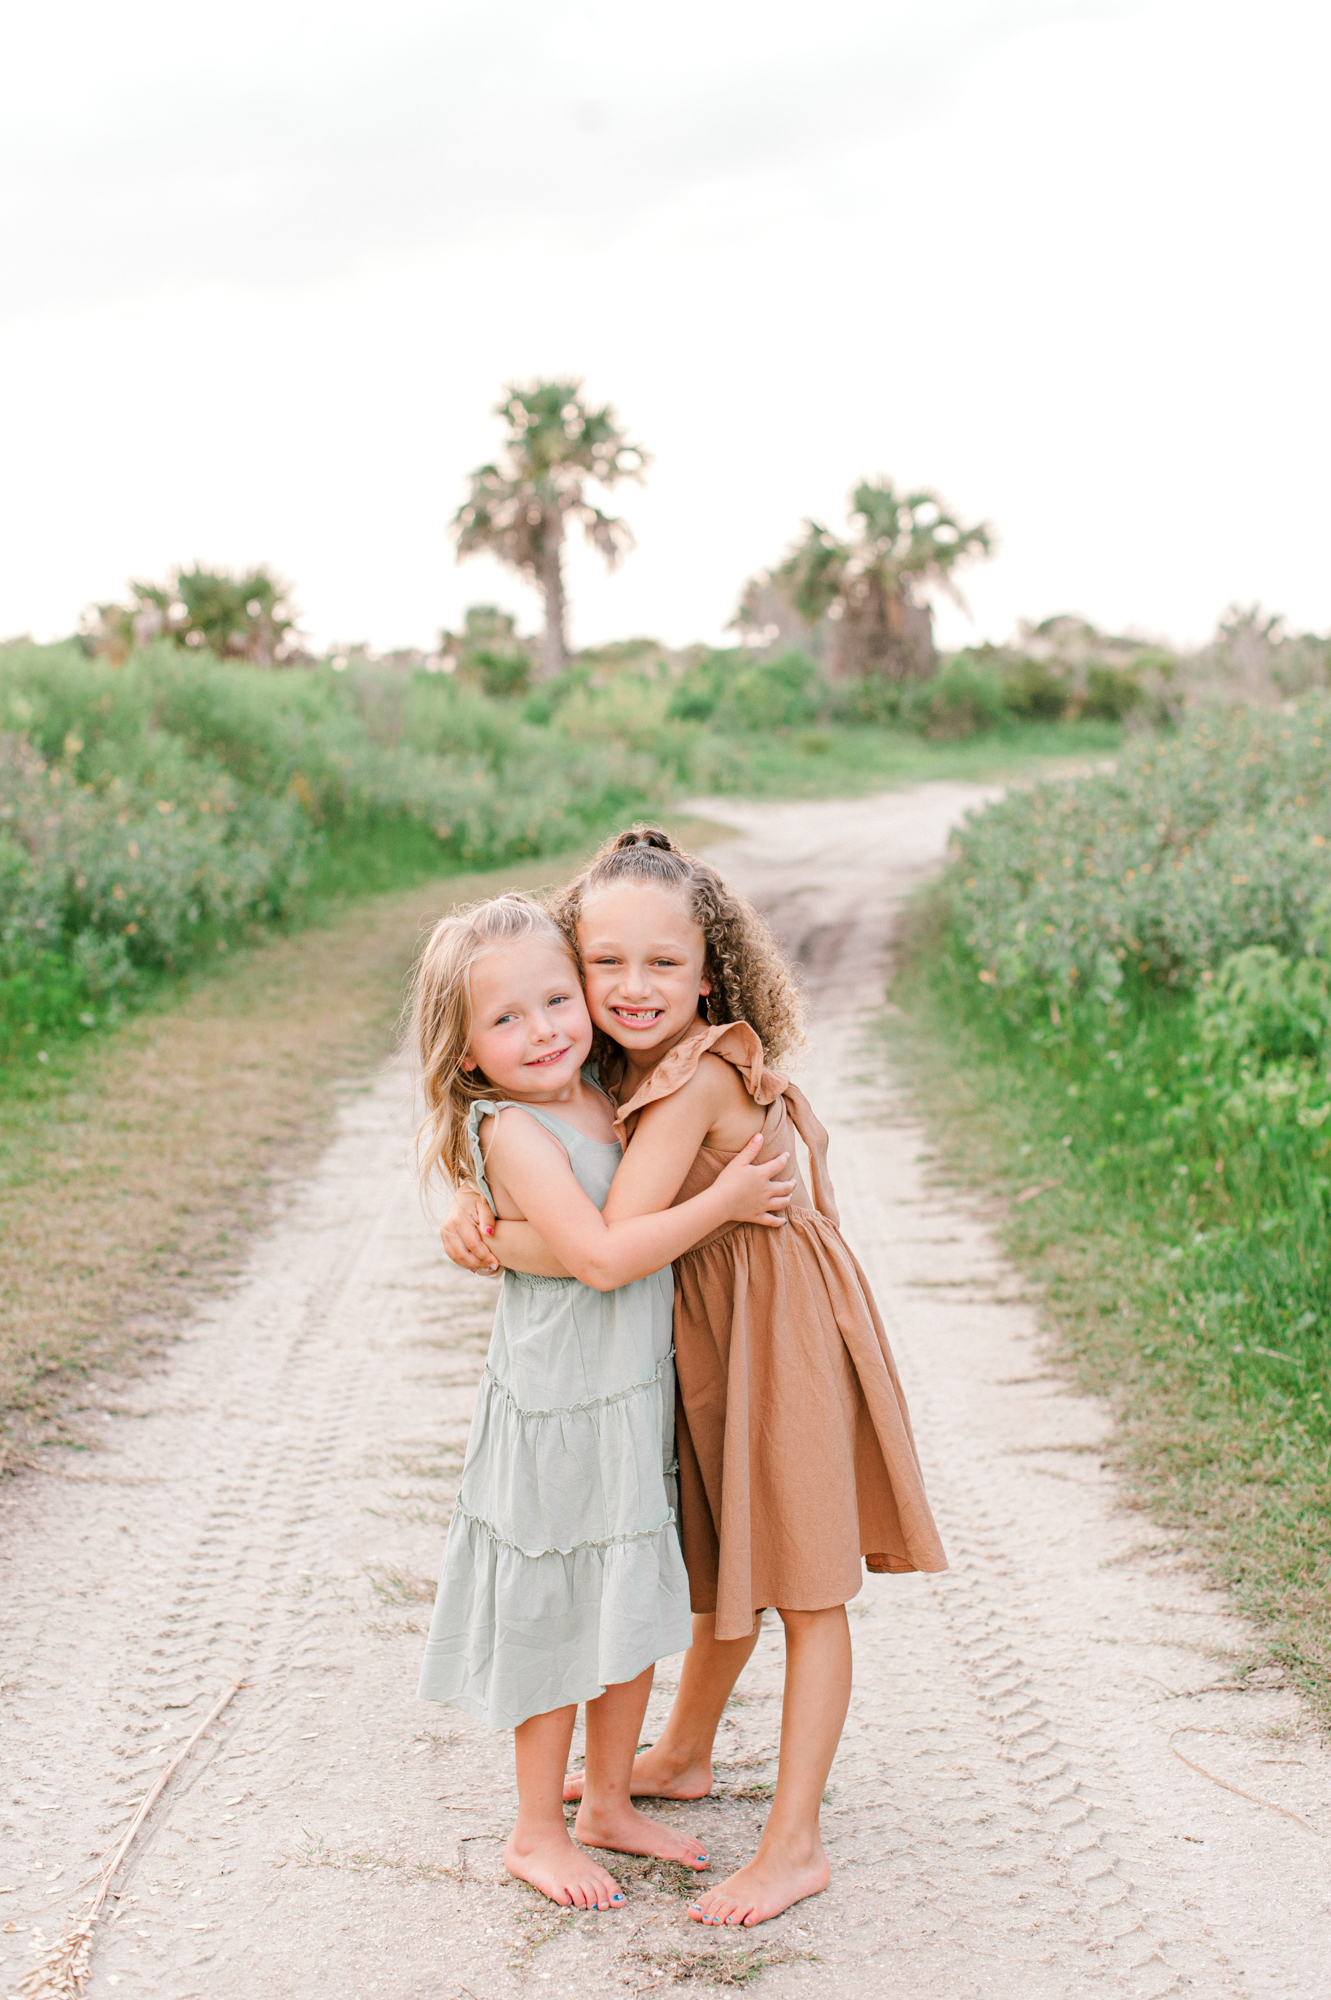 Sweet sisters standing on a beach access path hugging and smiling at the camera